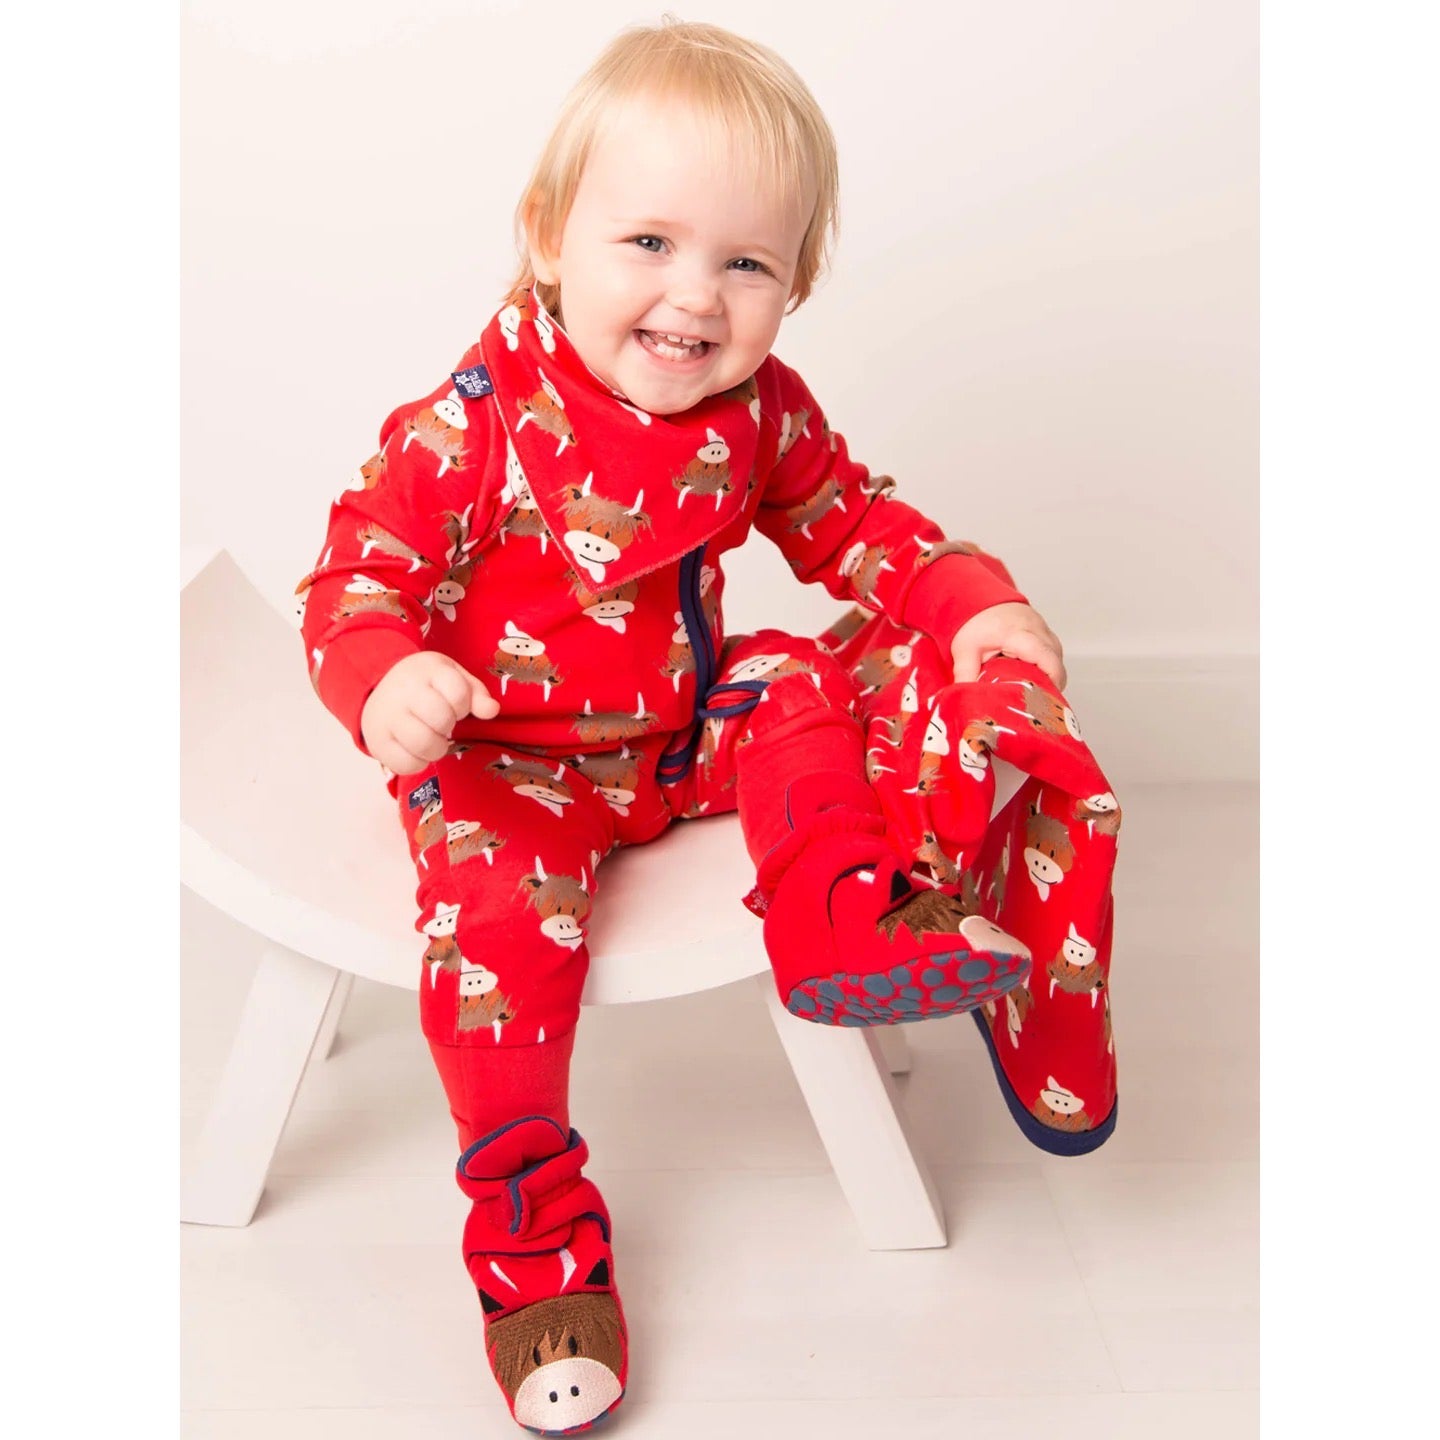 Blade & Rose Highland Cow Romper Clothing 3-6M / Red,6-12M / Red,12-18M / Red